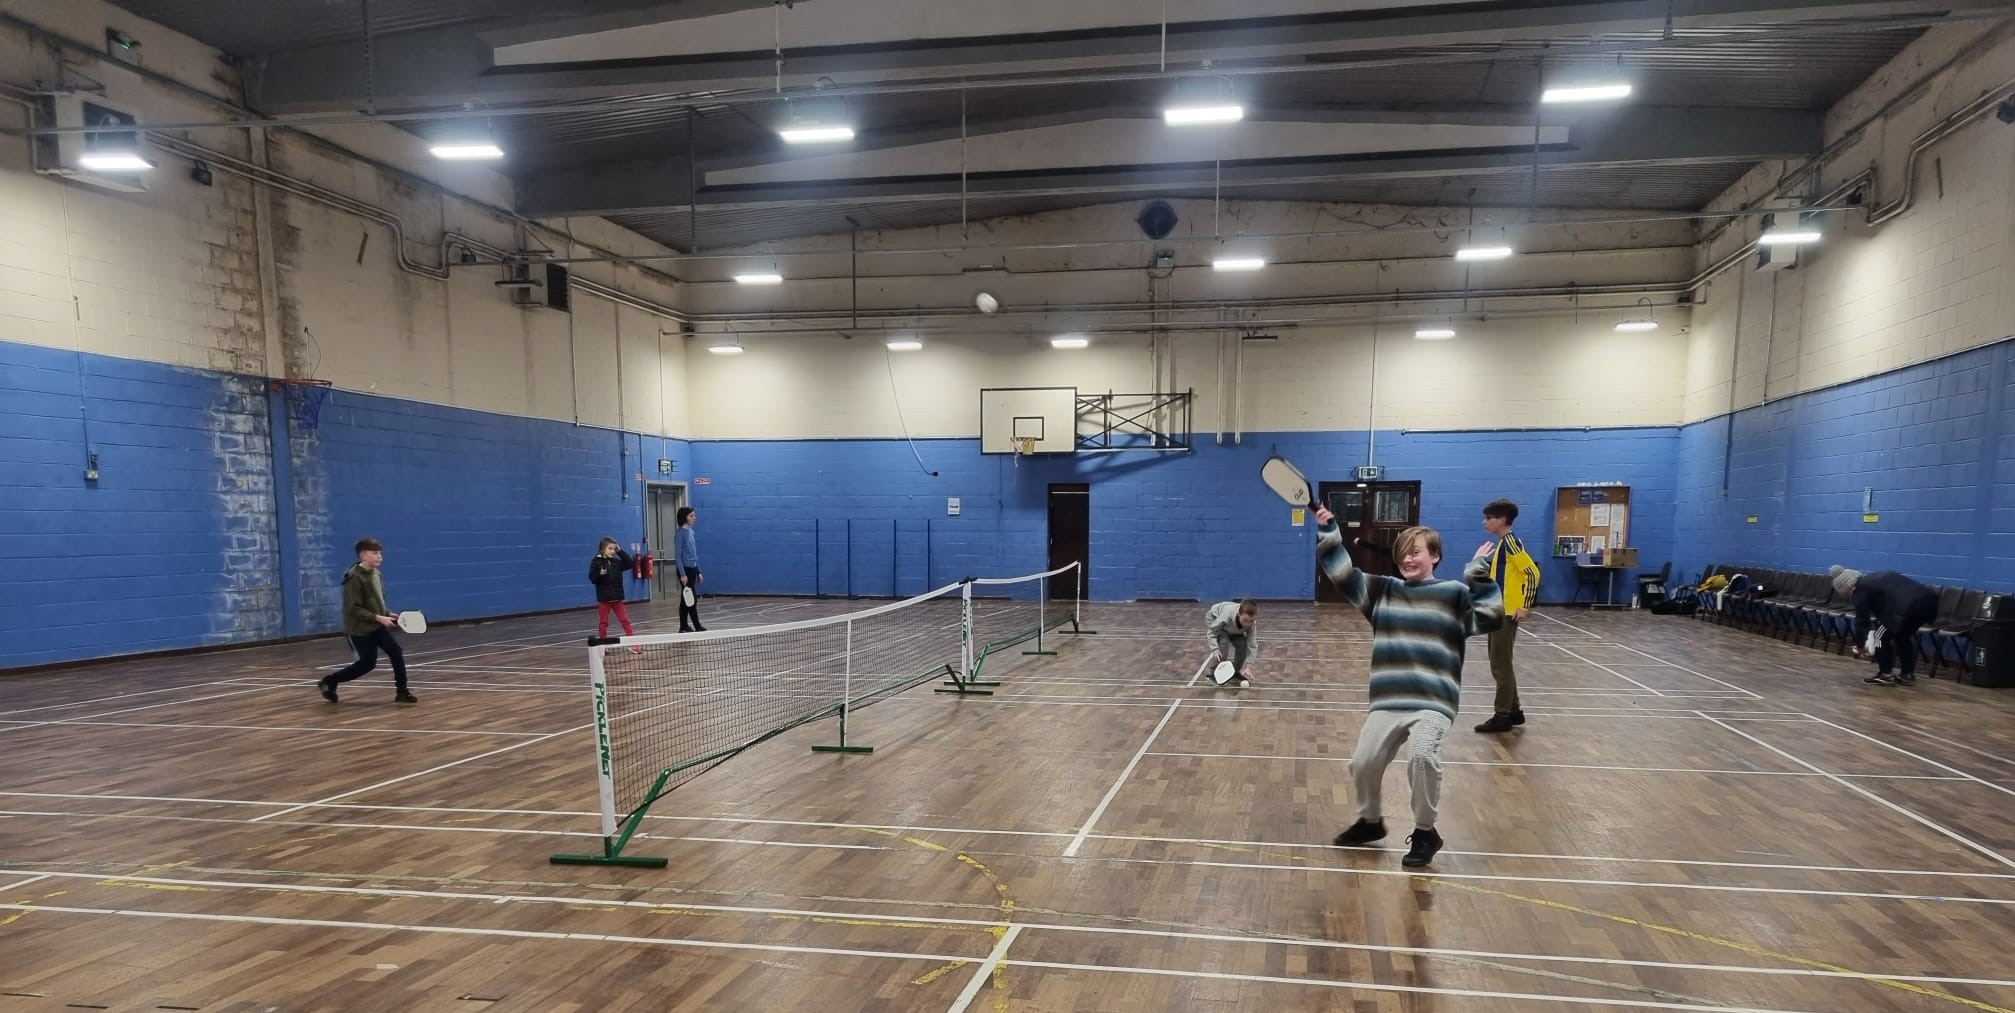 Kids playing pickleball in a hall